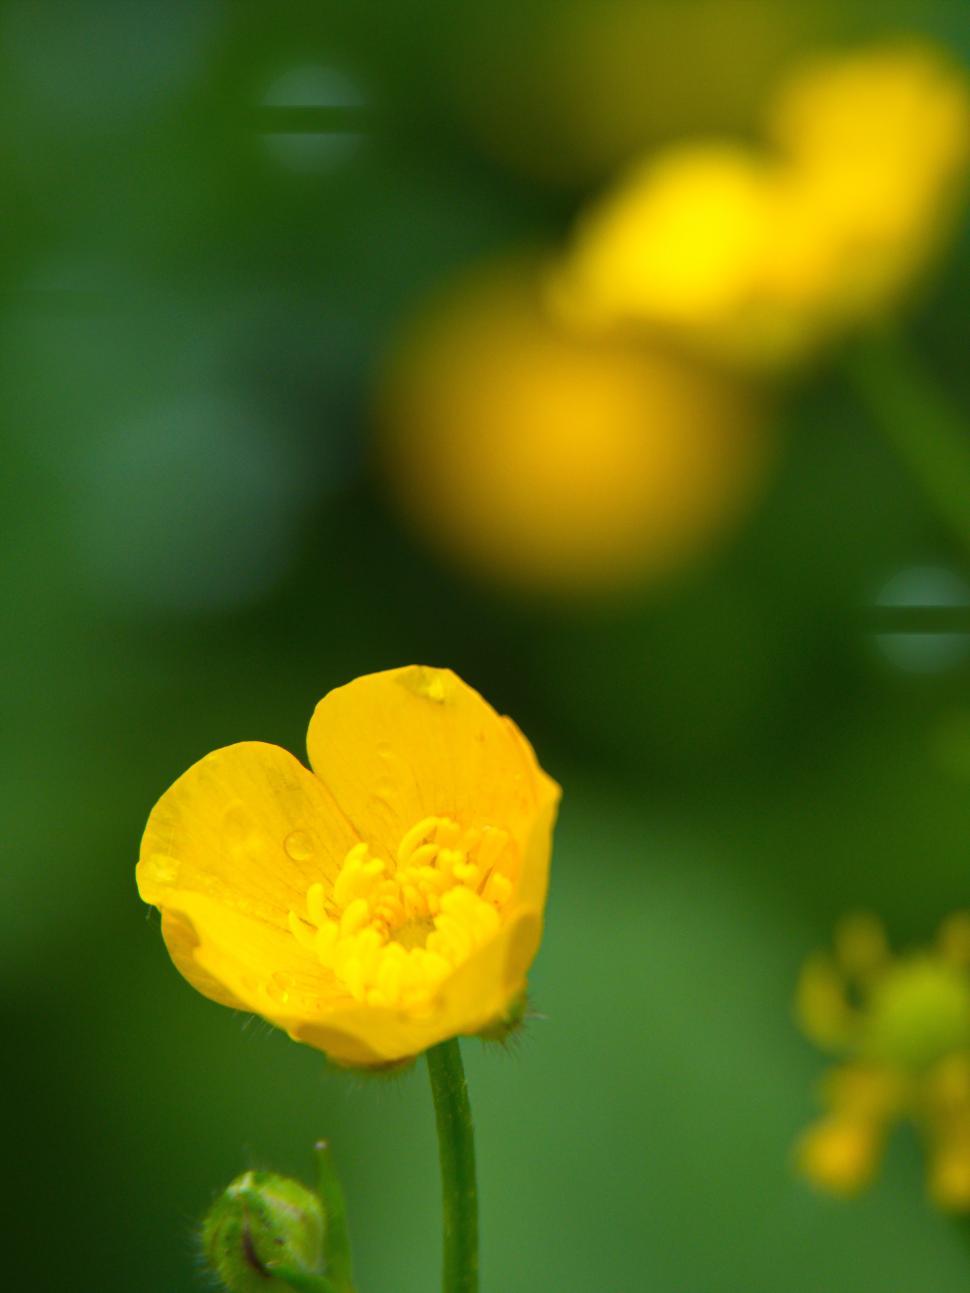 Free Image of A yellow flower with green background 